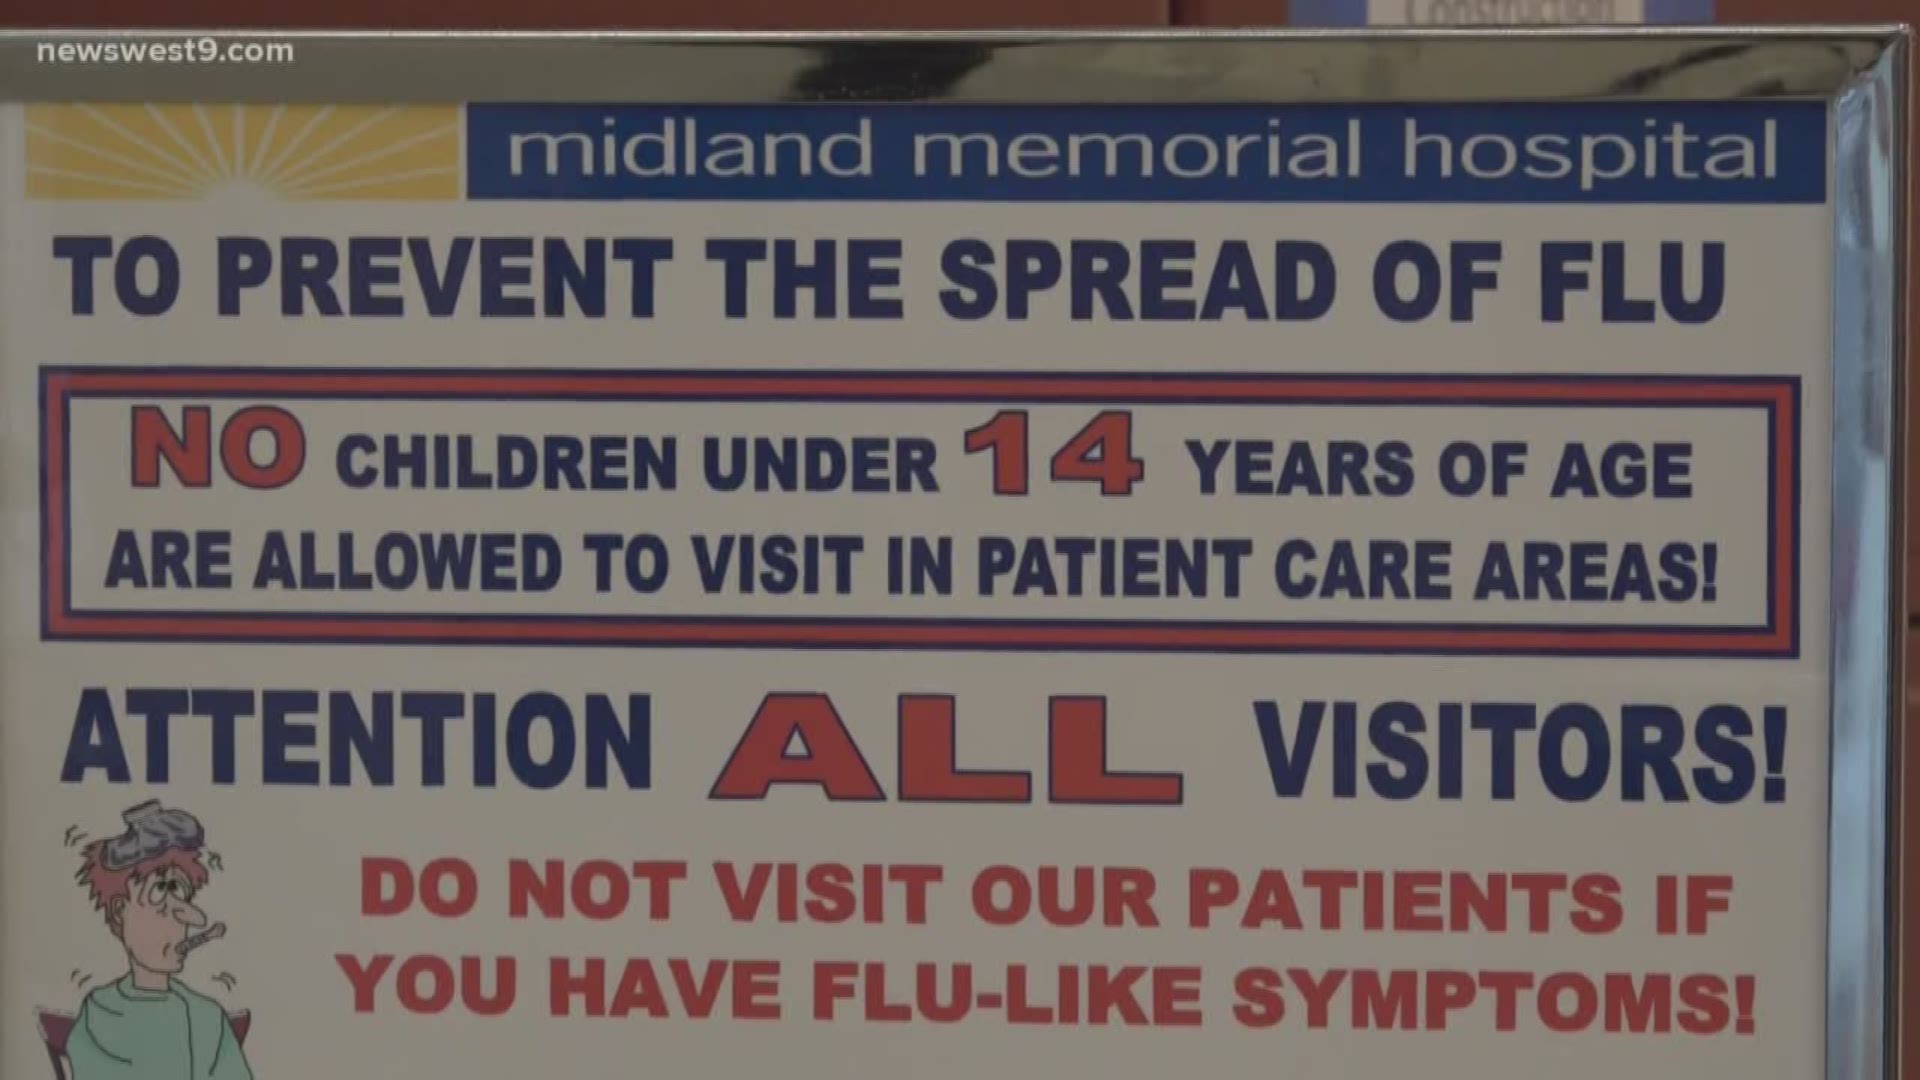 Midland Memorial Hospital provides tips on preventing the influenza illness.